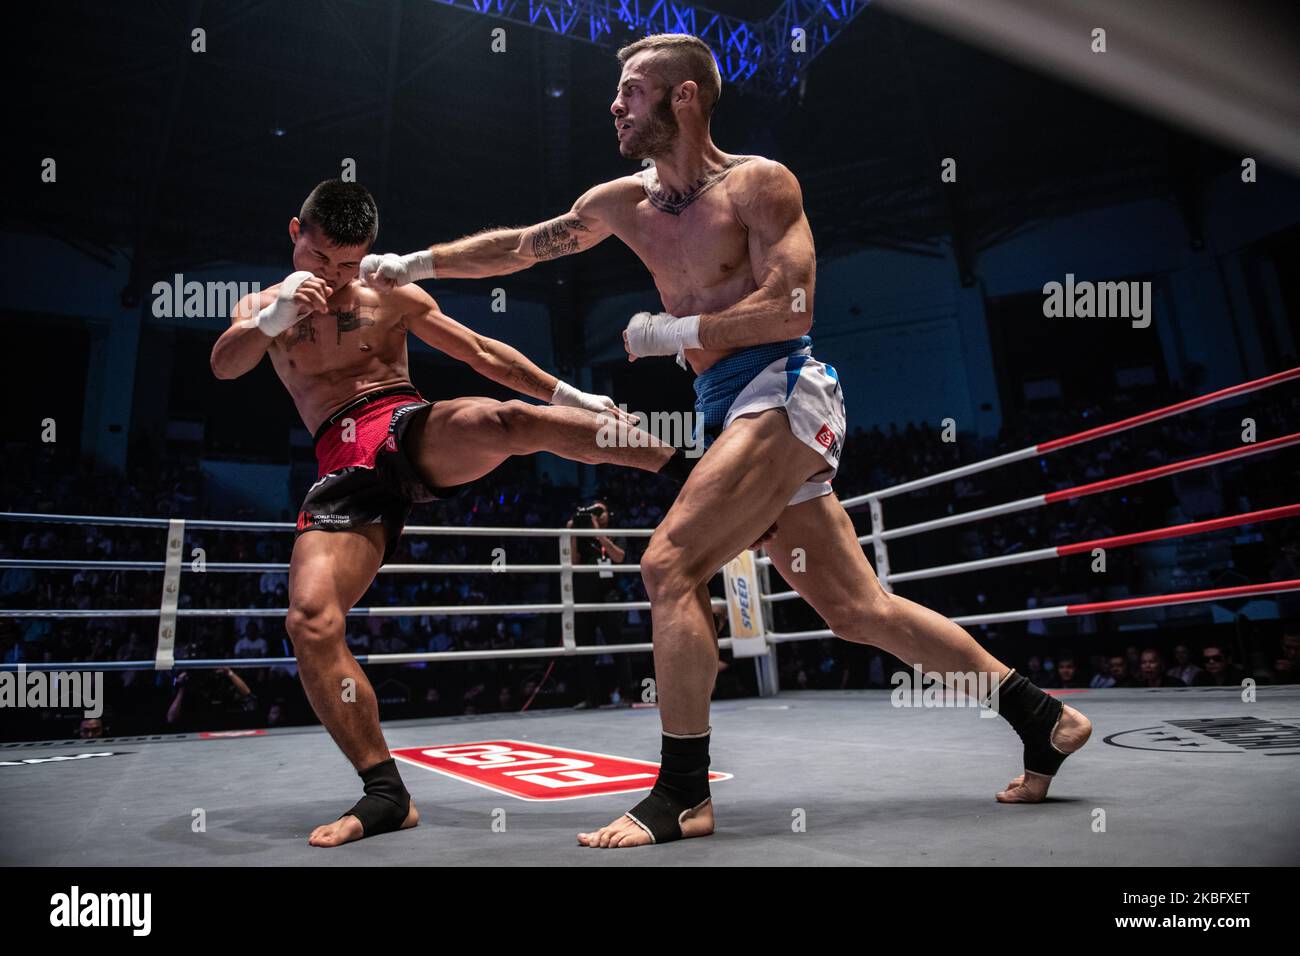 Saw Kaung Htet of Myanmar (R) fights against Samuel Toscano of Italy (L) in their welterweight bout during World Lethwei Championship in Yangon, Myanmar on January 31, 2020. (Photo by Shwe Paw Mya Tin/NurPhoto) Stock Photo